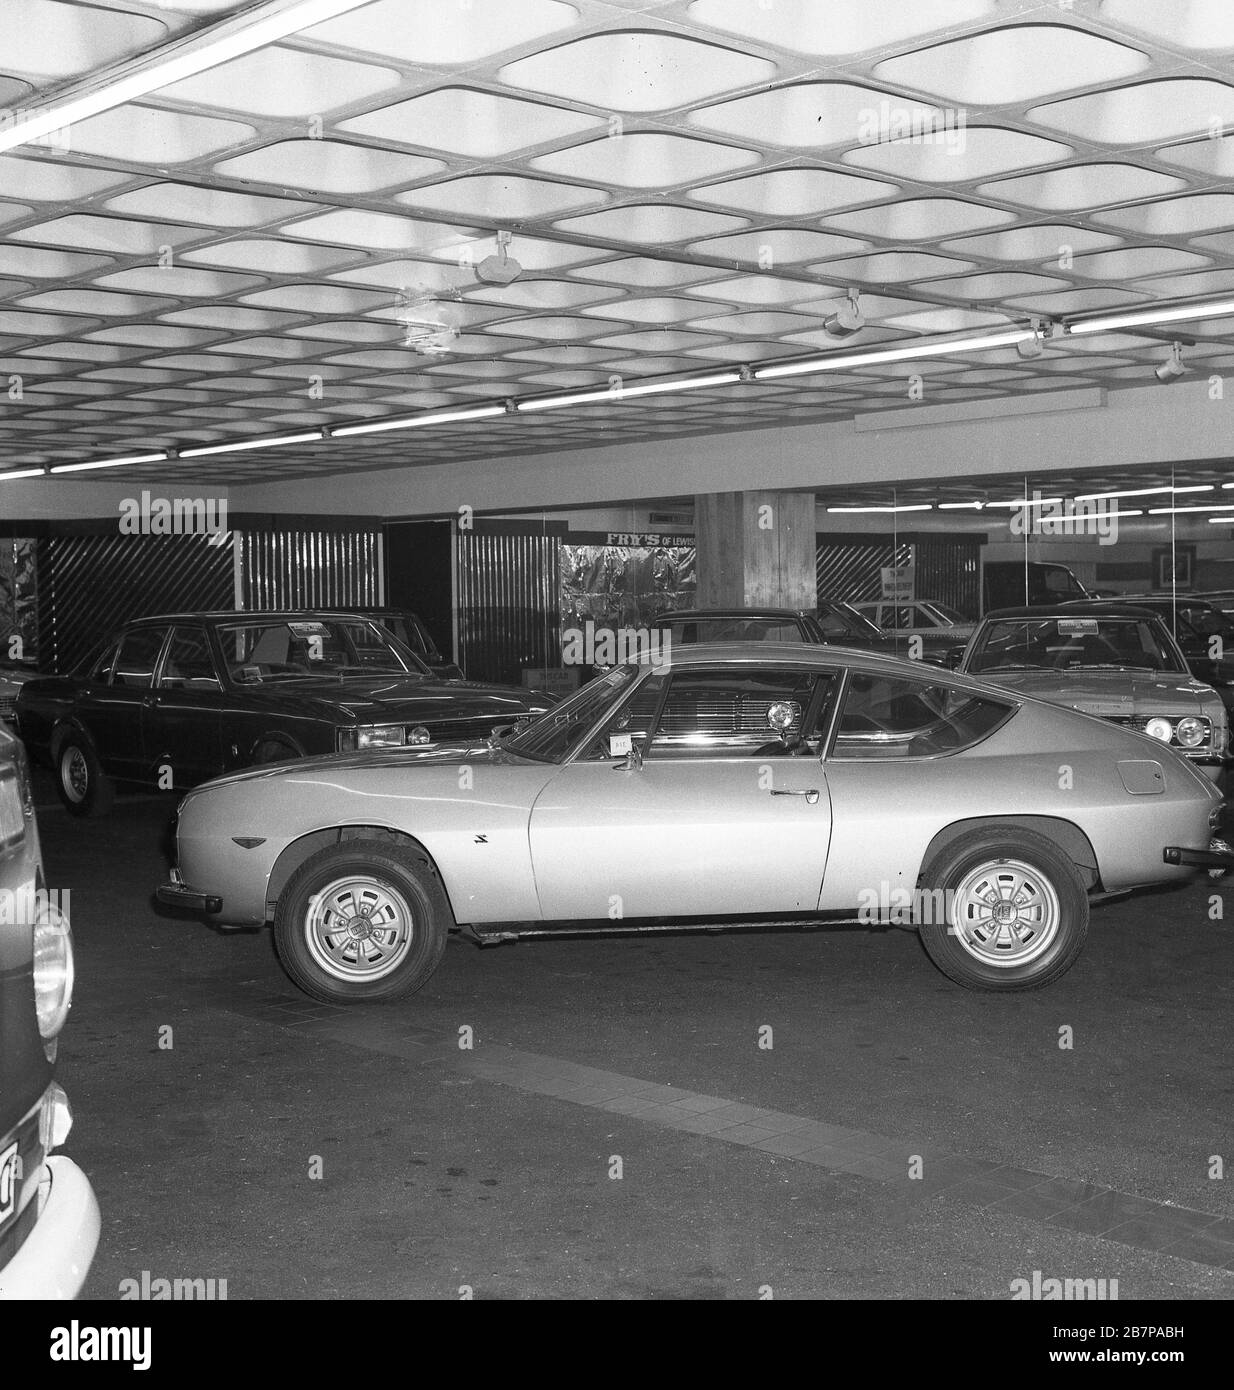 1970s, historical, sports coupe motorcar of the era parked in the car showroom of Fry's of Lewisham, South East, London, England, UK. The car, possibly a version of the Ford Mustang, was known as a 'Fastback Ford. Stock Photo